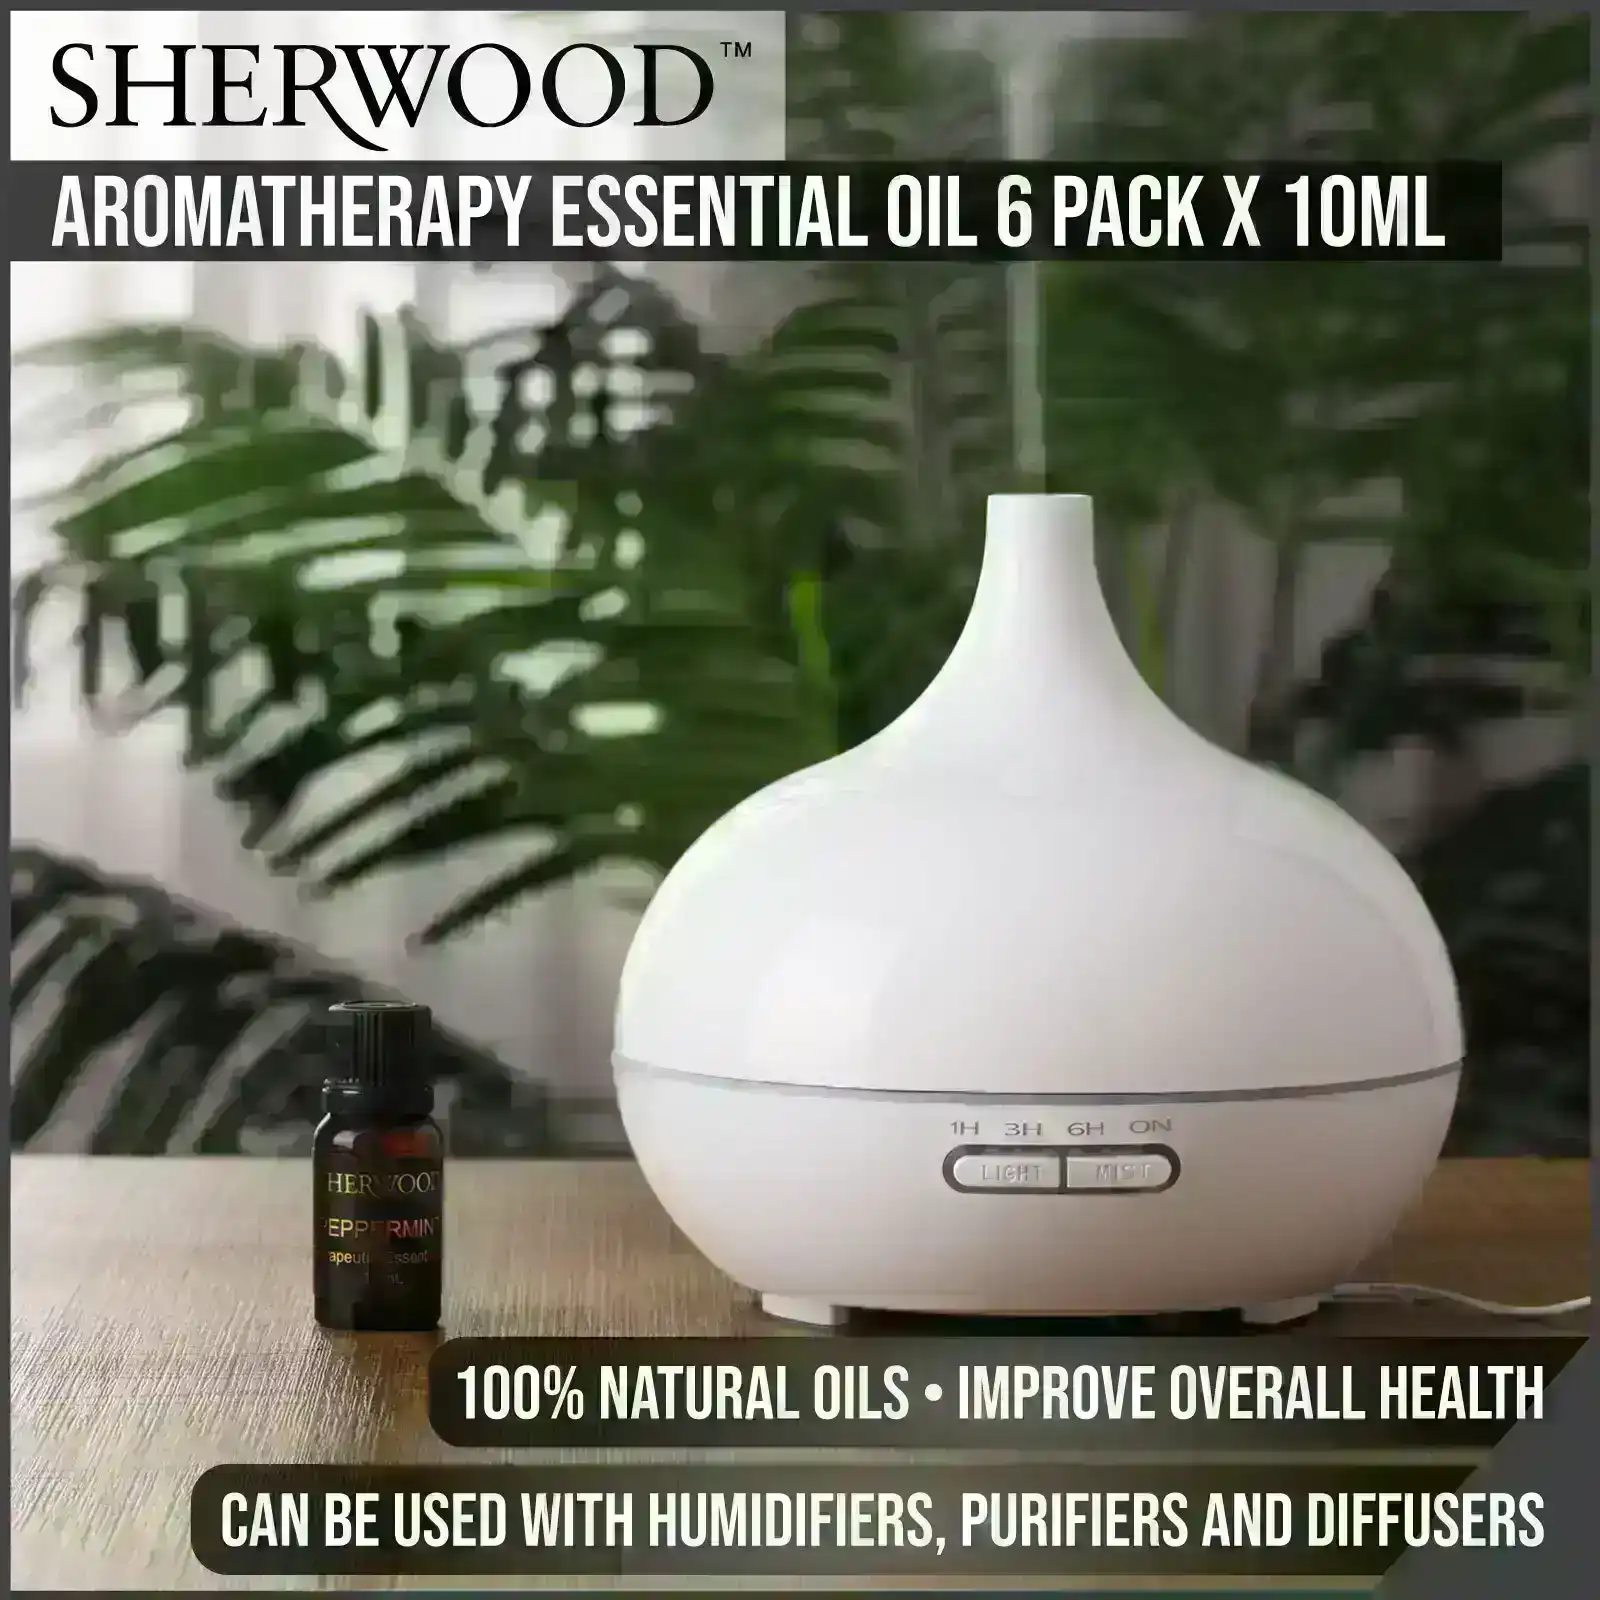 Sherwood Home Diffuser Aromatherapy Essential Oil 6 Pack For Diffuser/Humidifier X 10ML